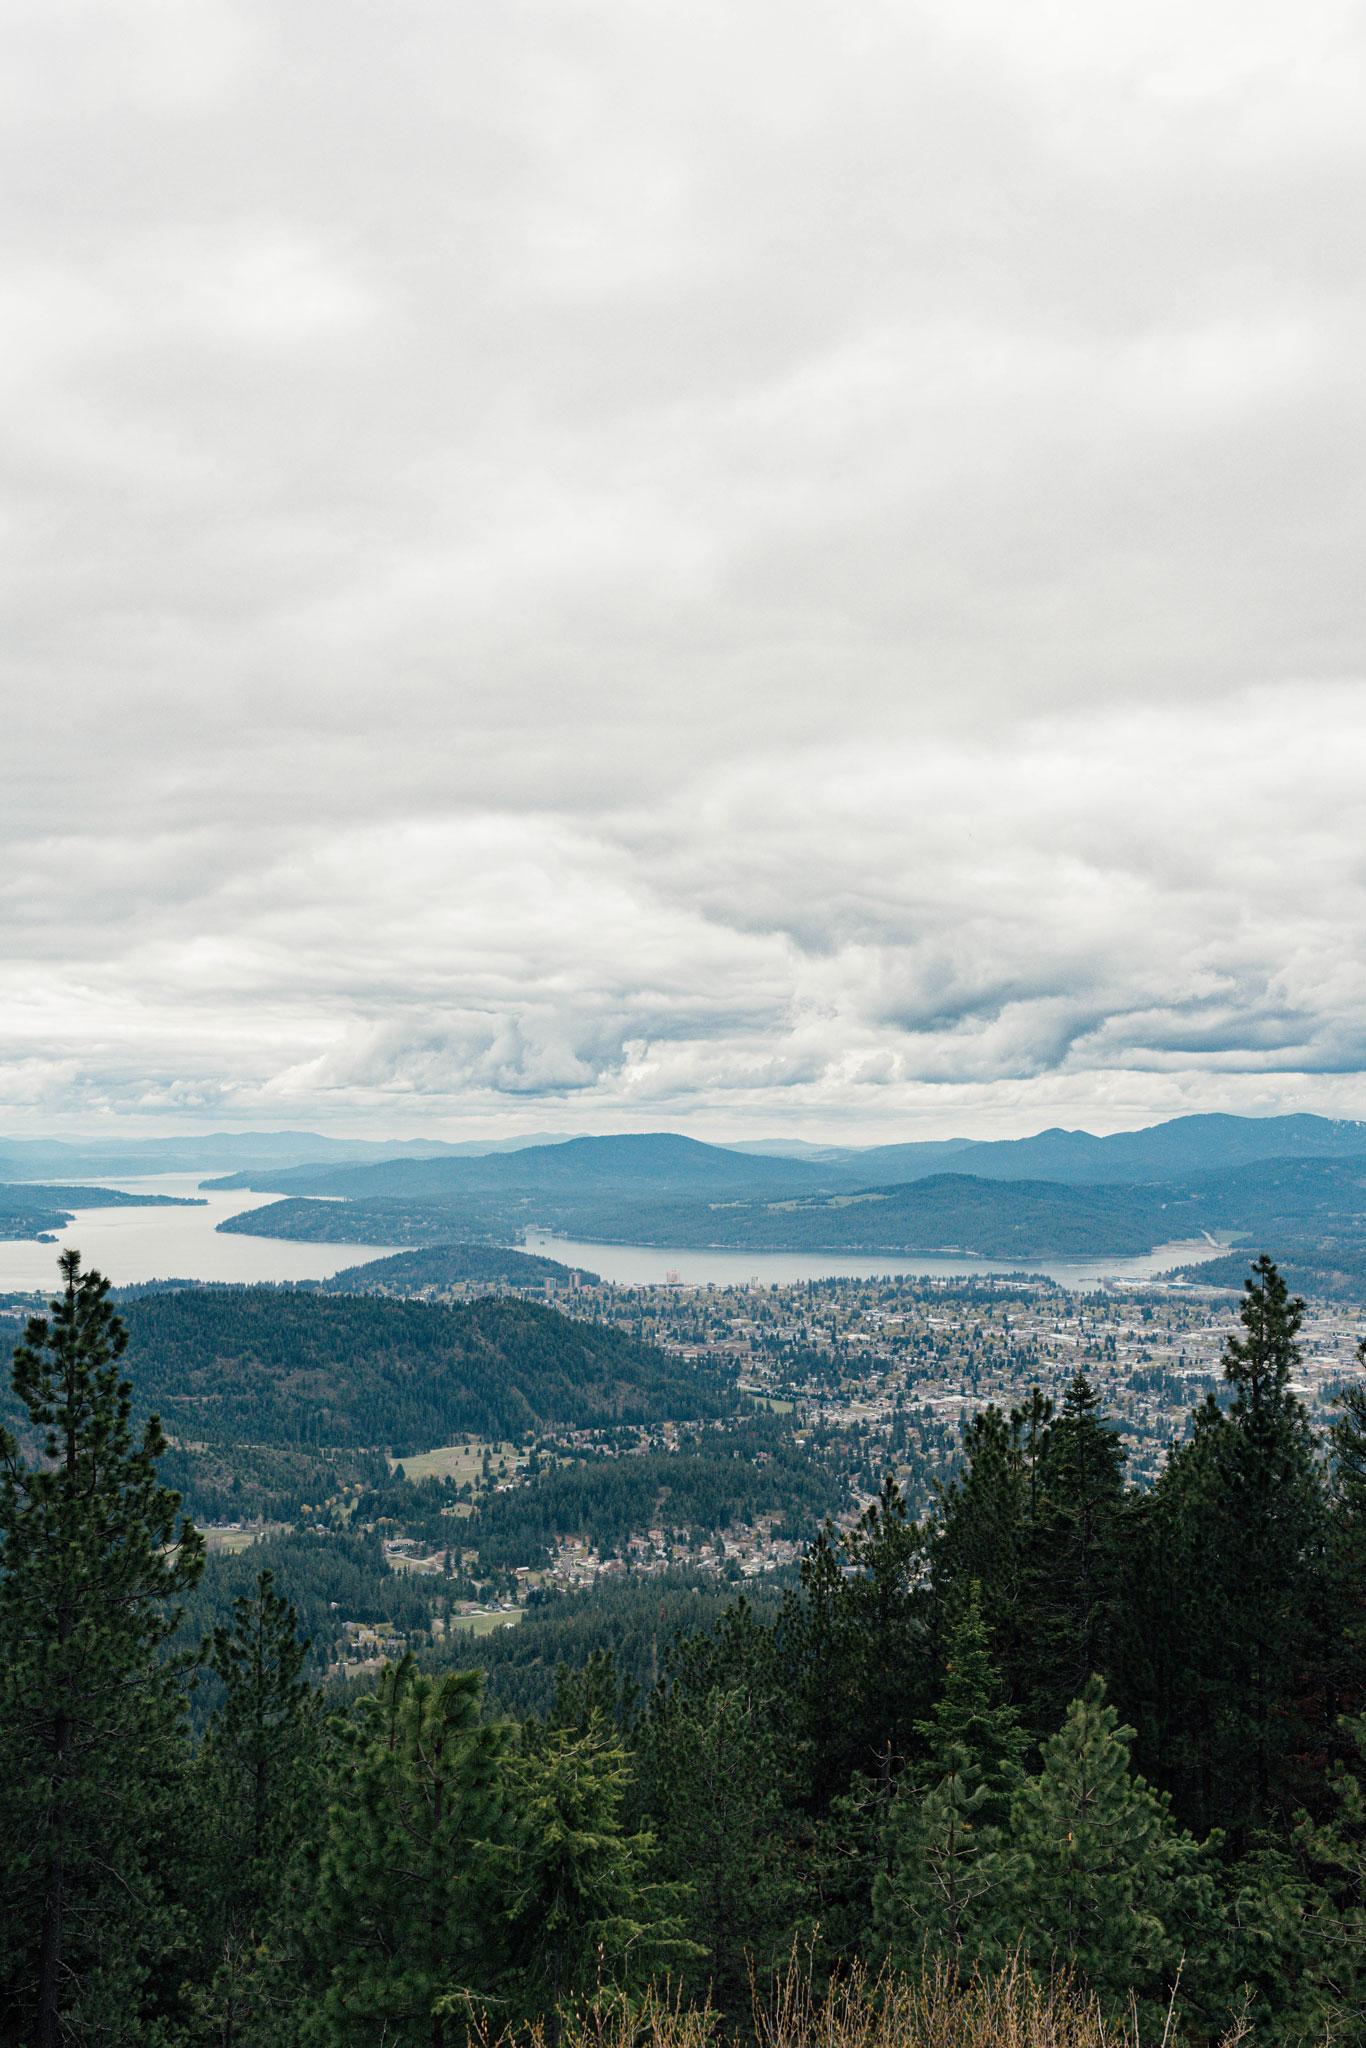 From the top you can see post falls, Coeur d'Alene, and Hayden.